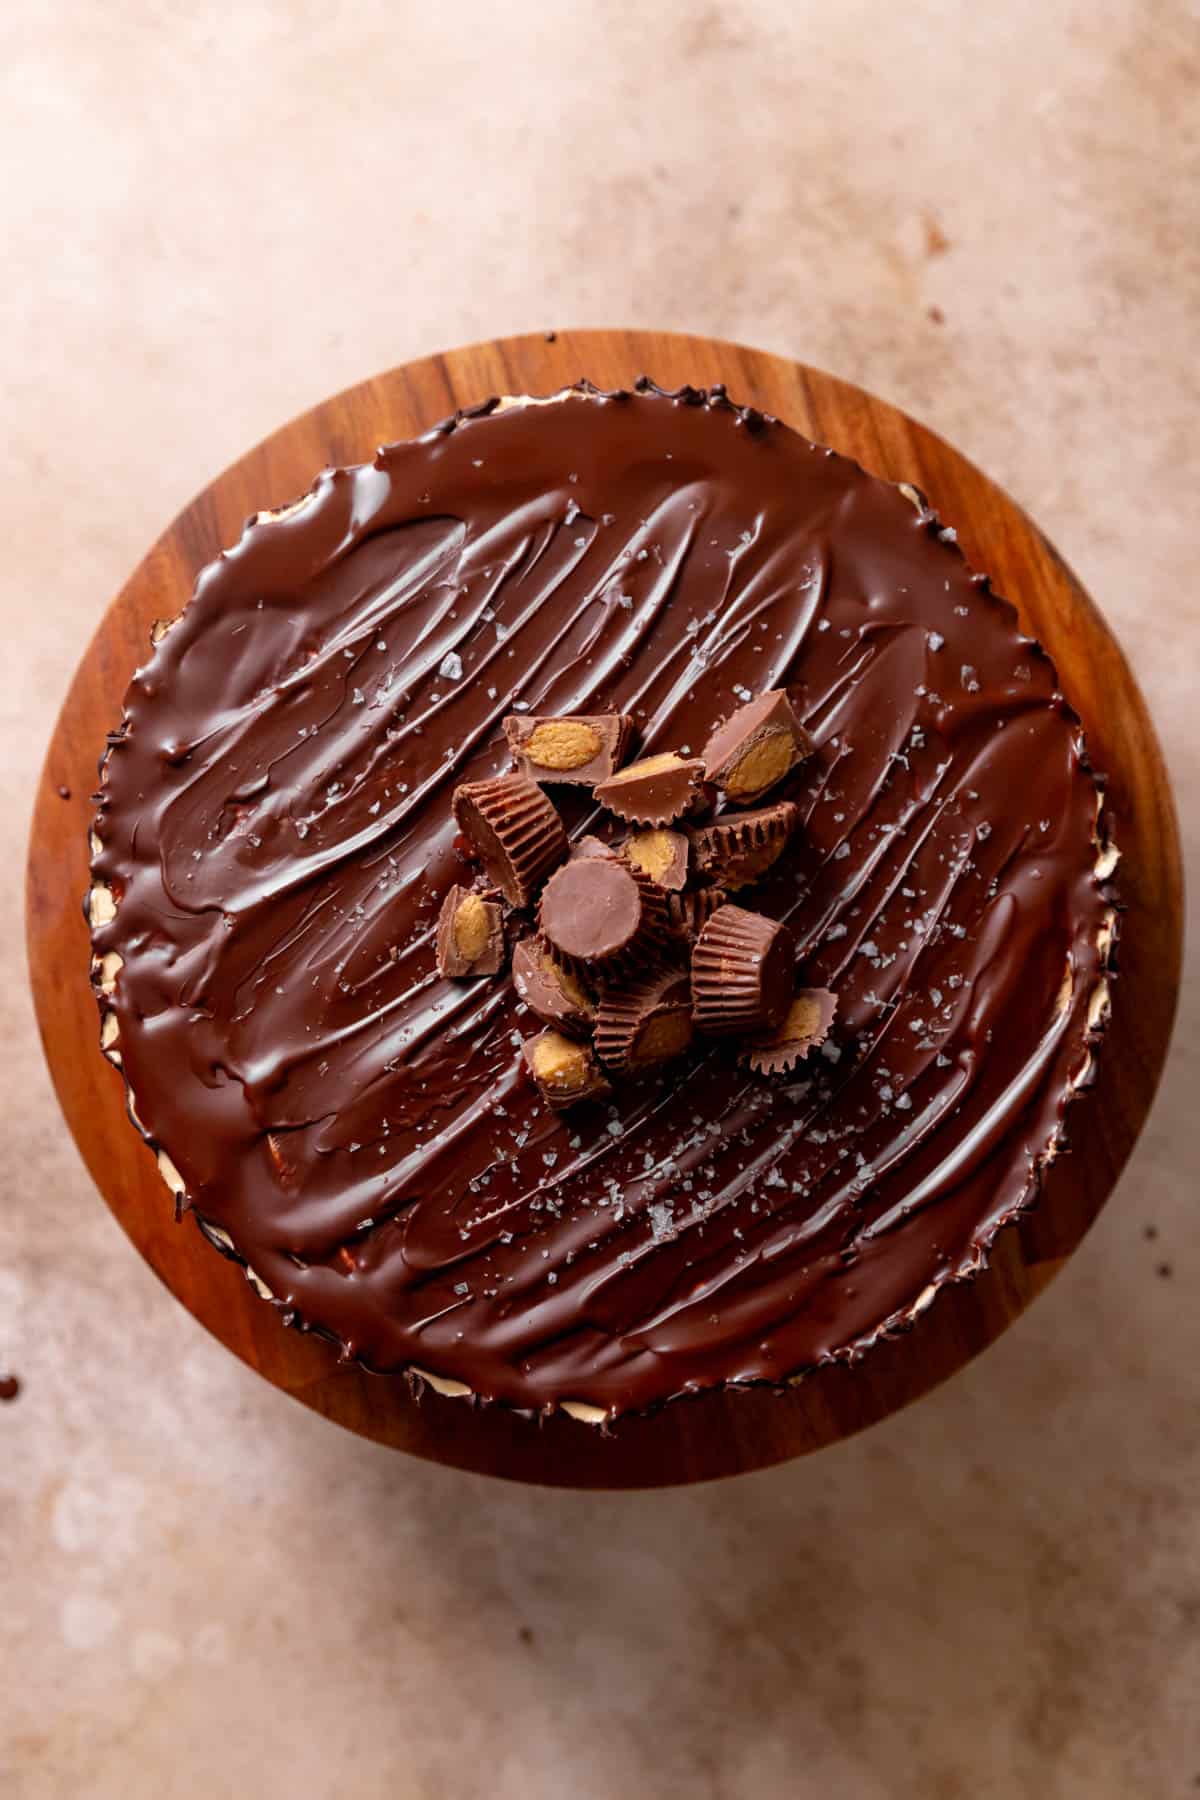 An overhead shot of the top of the Reese's cake to show the chopped peanut butter cups and sea salt.